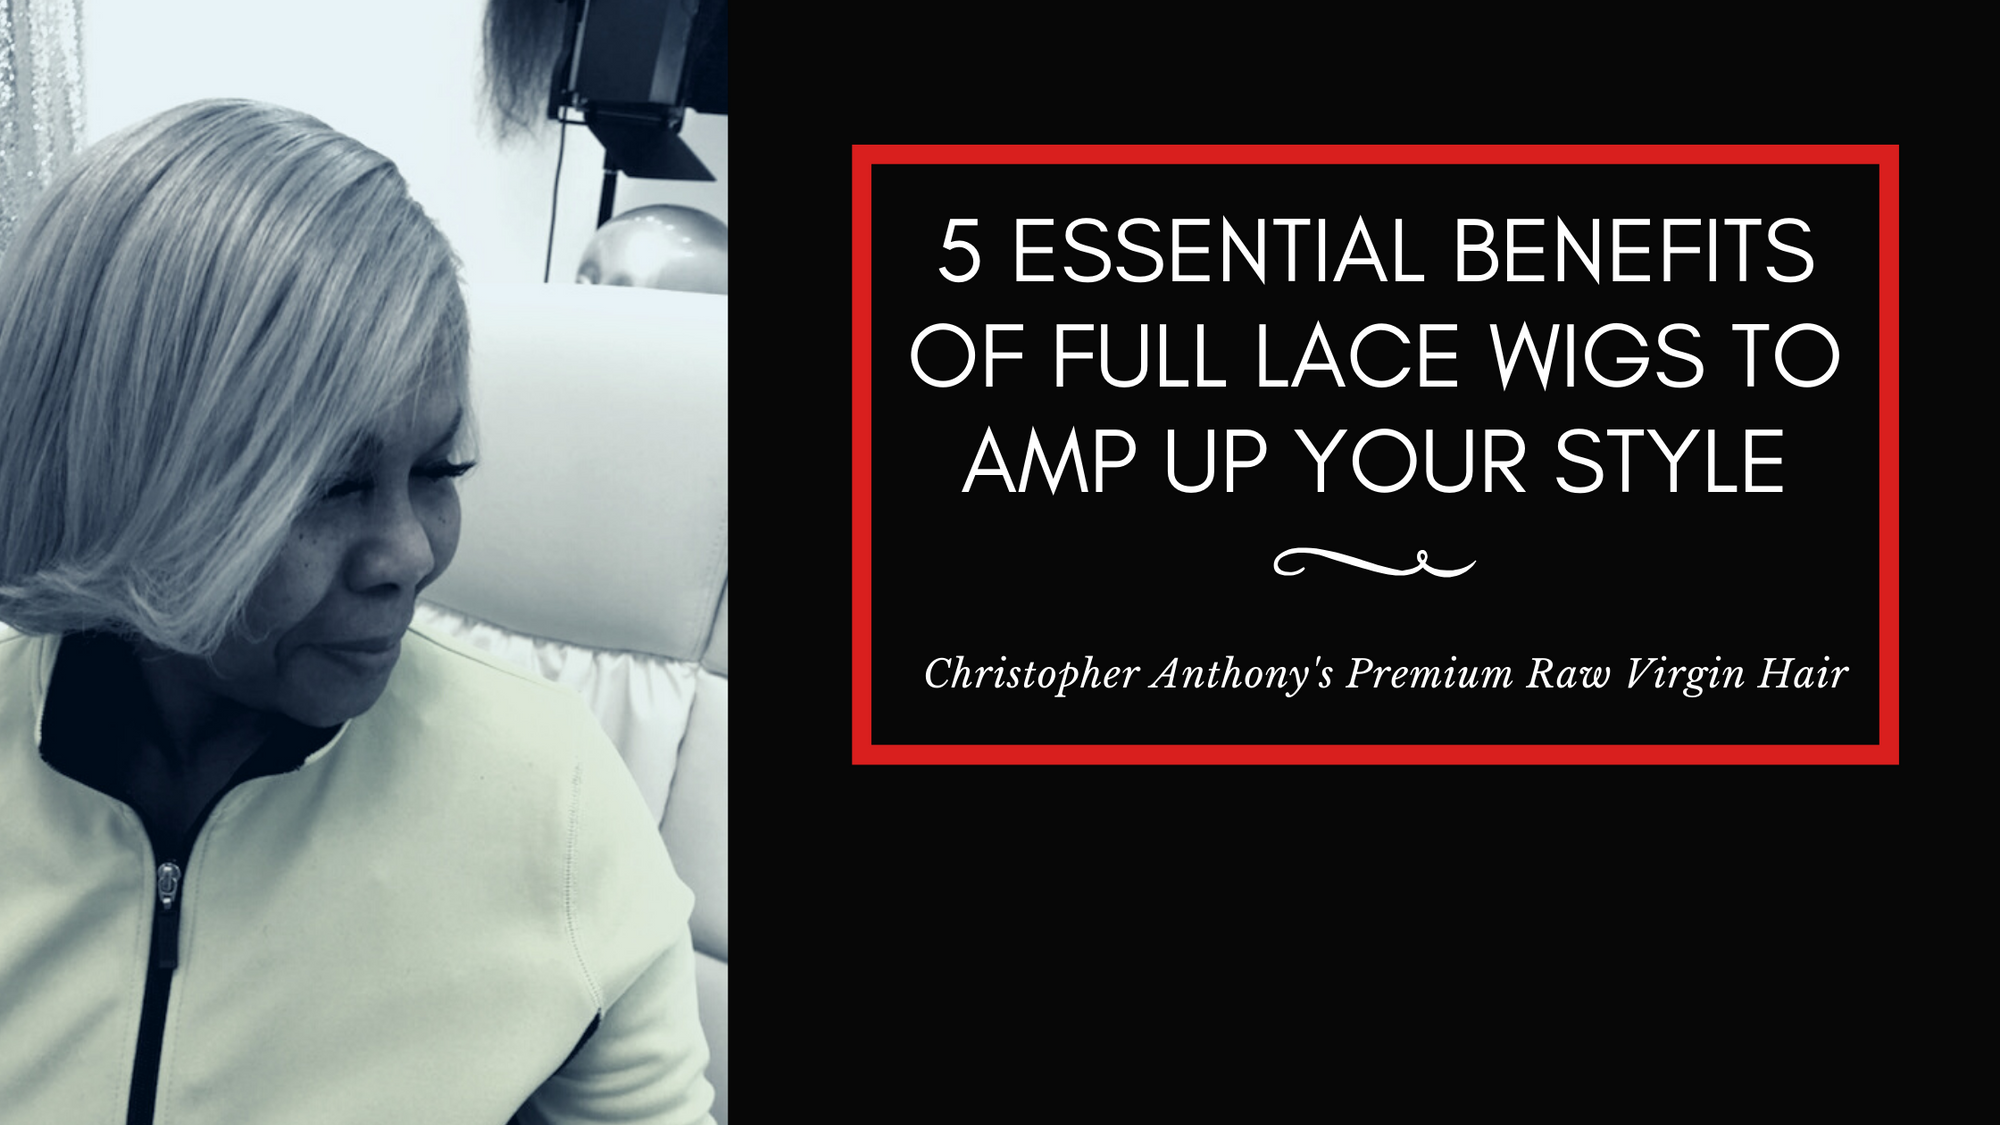 5 Essential Benefits of Full Lace Wigs to Amp Up Your Style